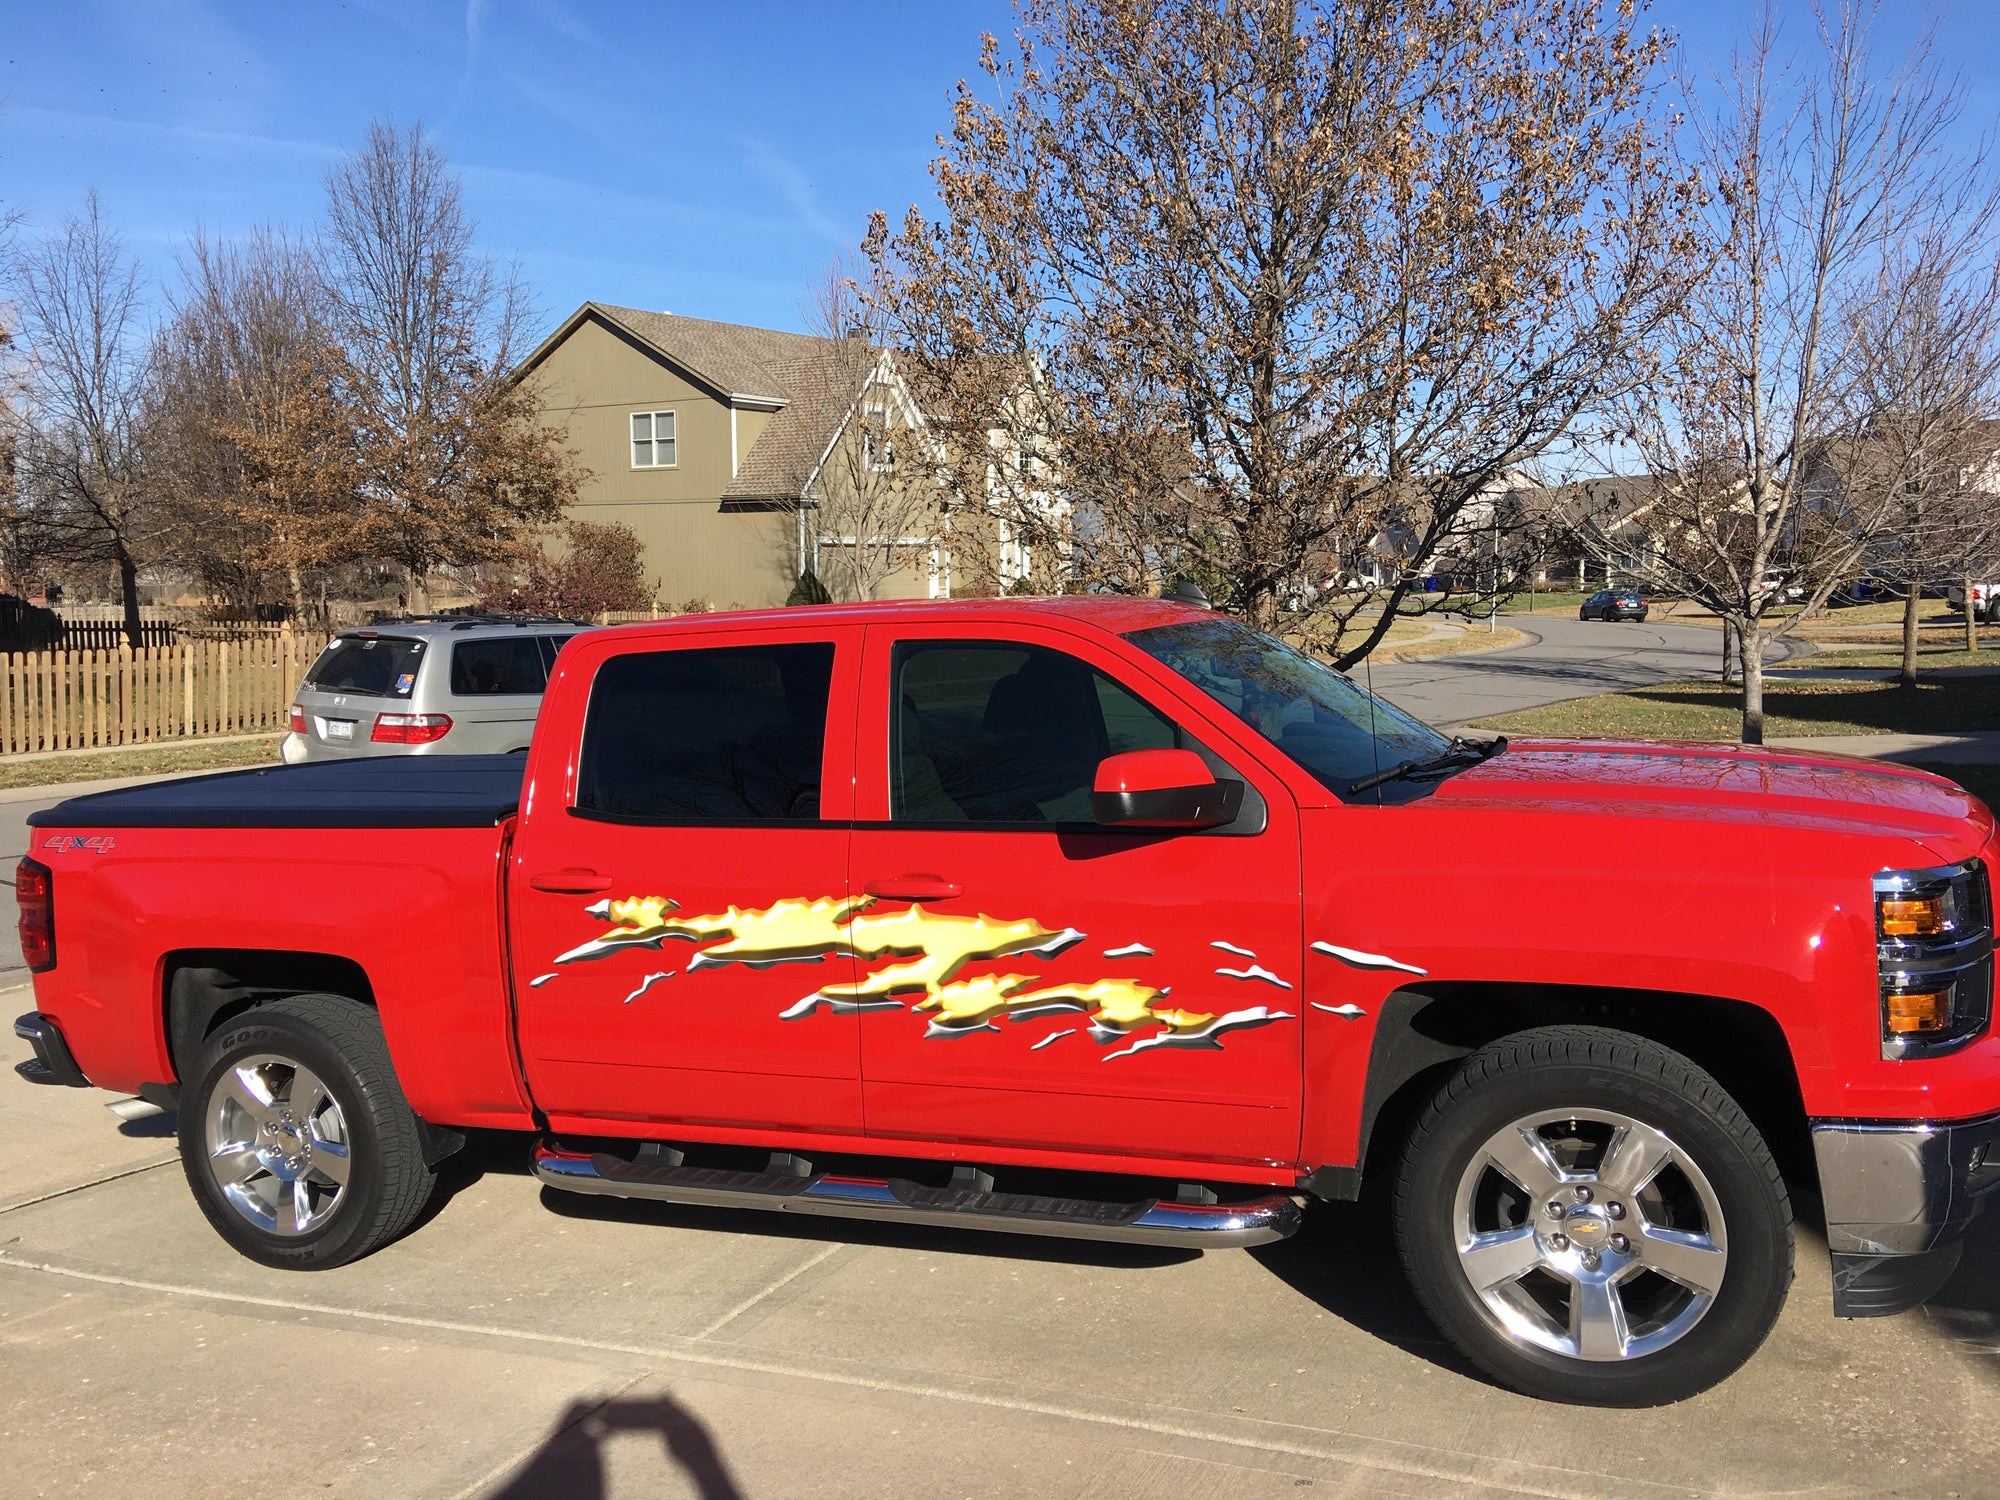 Gold mud splash decal on the side of red chevy truck